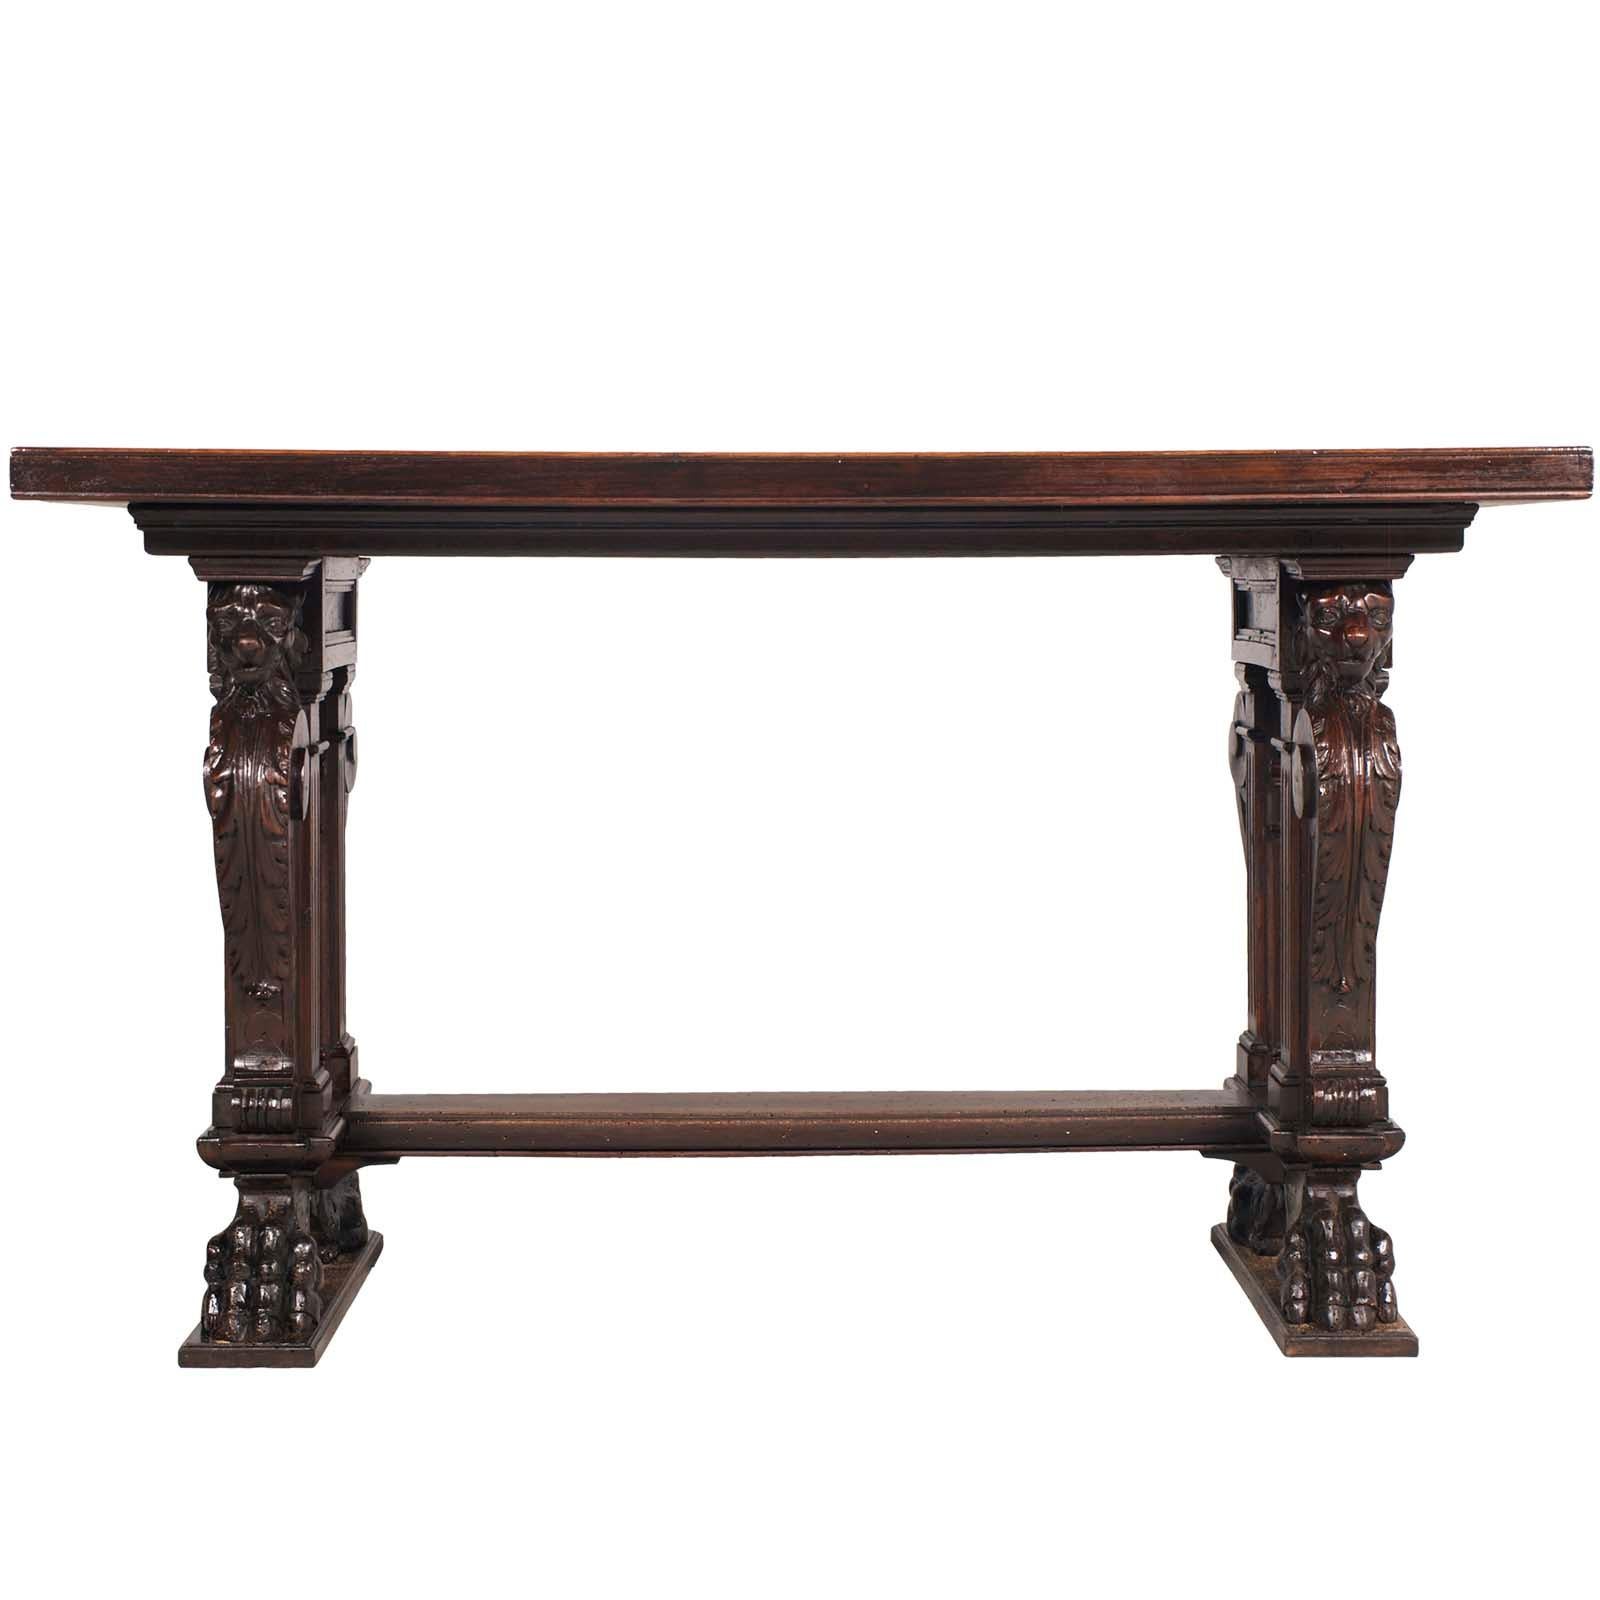 Late 19th century table, writing desk, in hand carved walnut, by Testolini & Salviati.
The important desk is all in solid walnut, with a veneered top. Neoclassical legs with 4 lions carved to remember the symbol of the famous Republic of Venice,